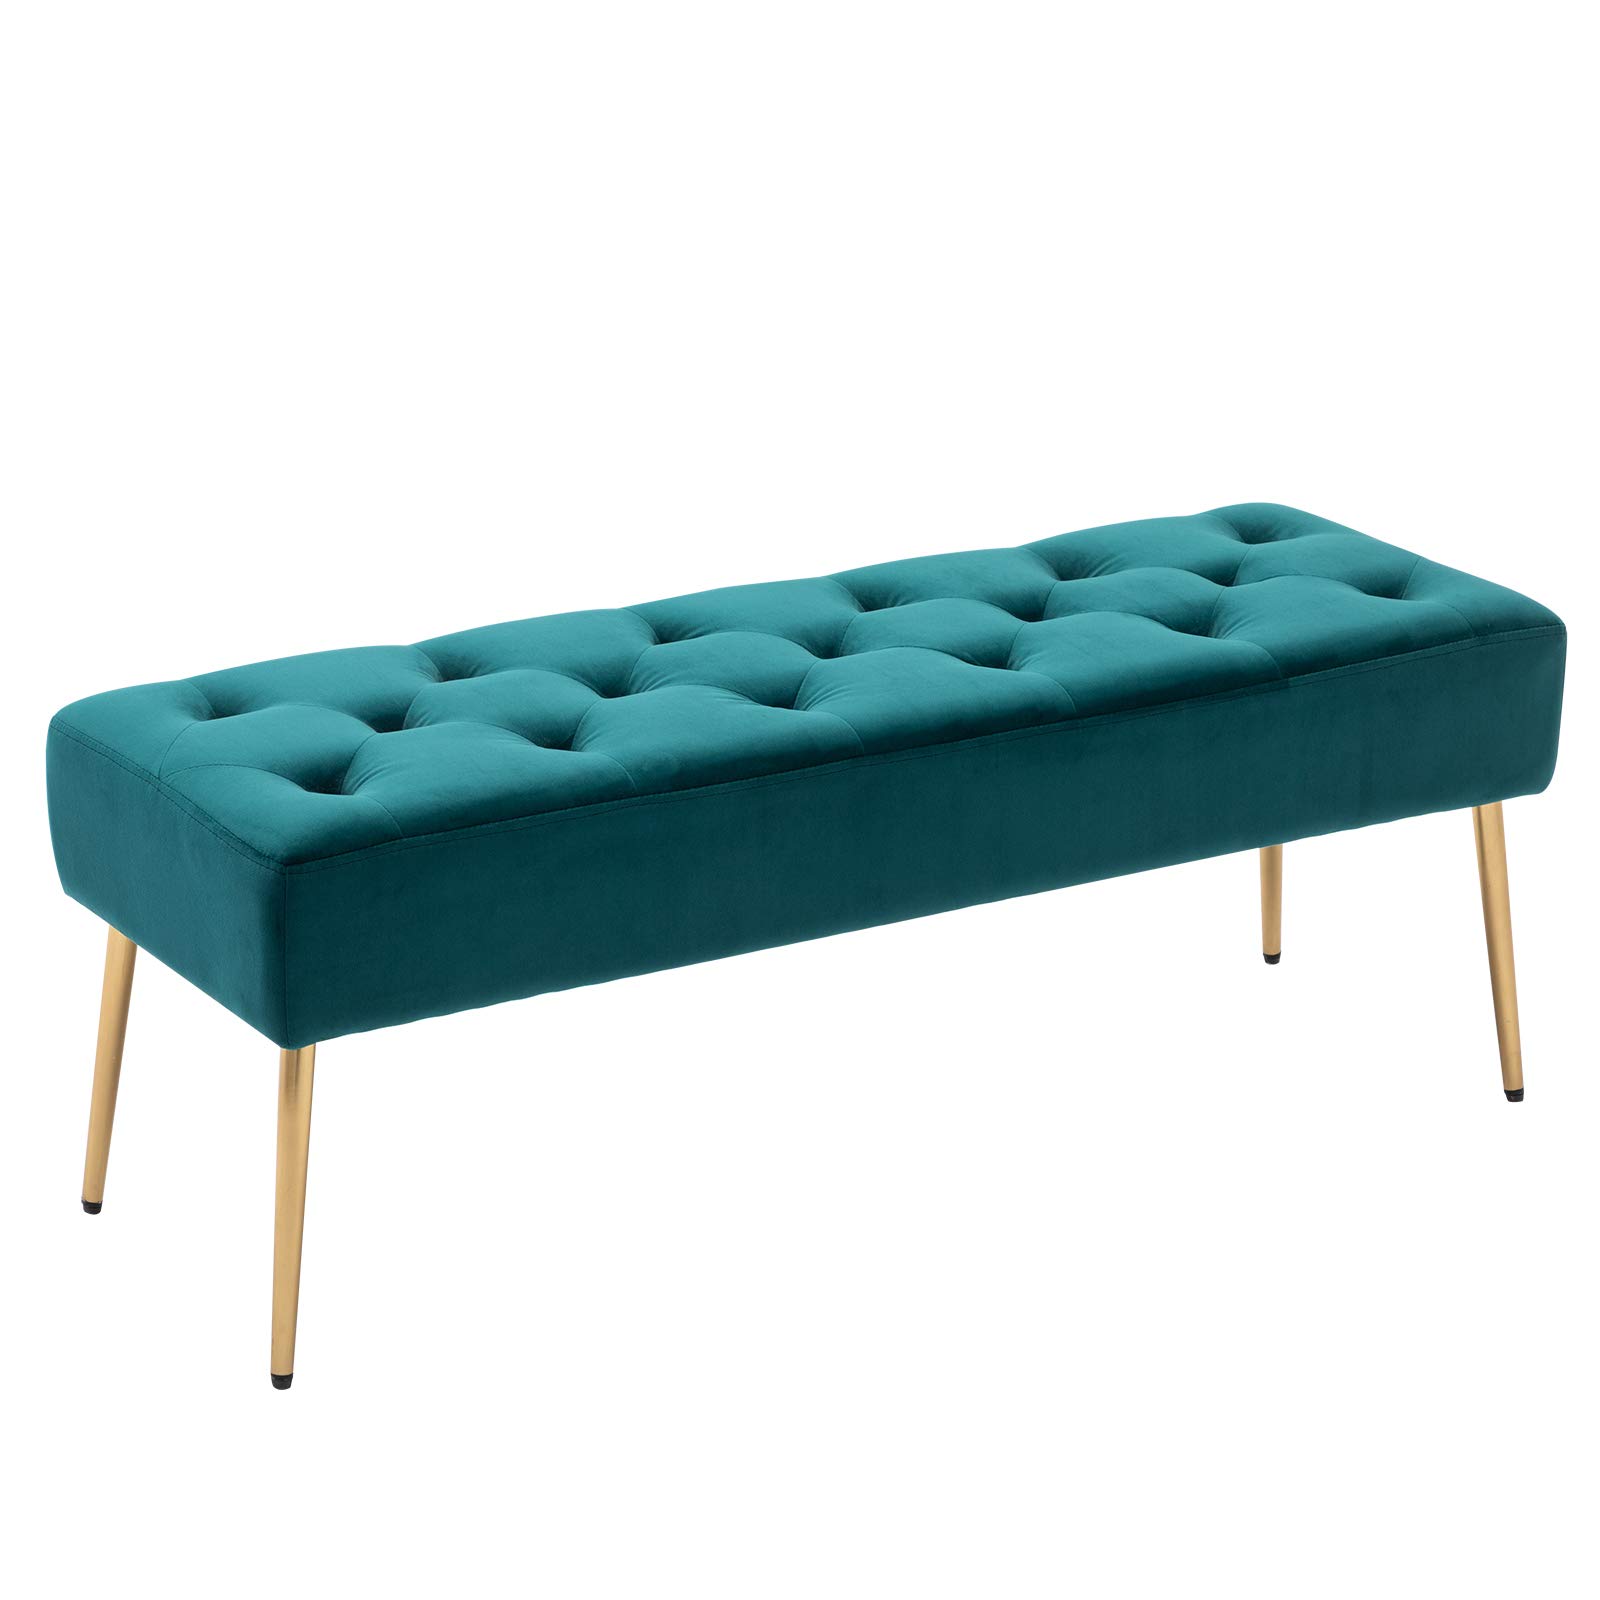 Duhome Elegant Lifes Duhome Modern Velvet Bench Ottoman, Upholstered Bedroom Benches Footrest Stool Button-Tufted Table Bench Dining Bench with gold 